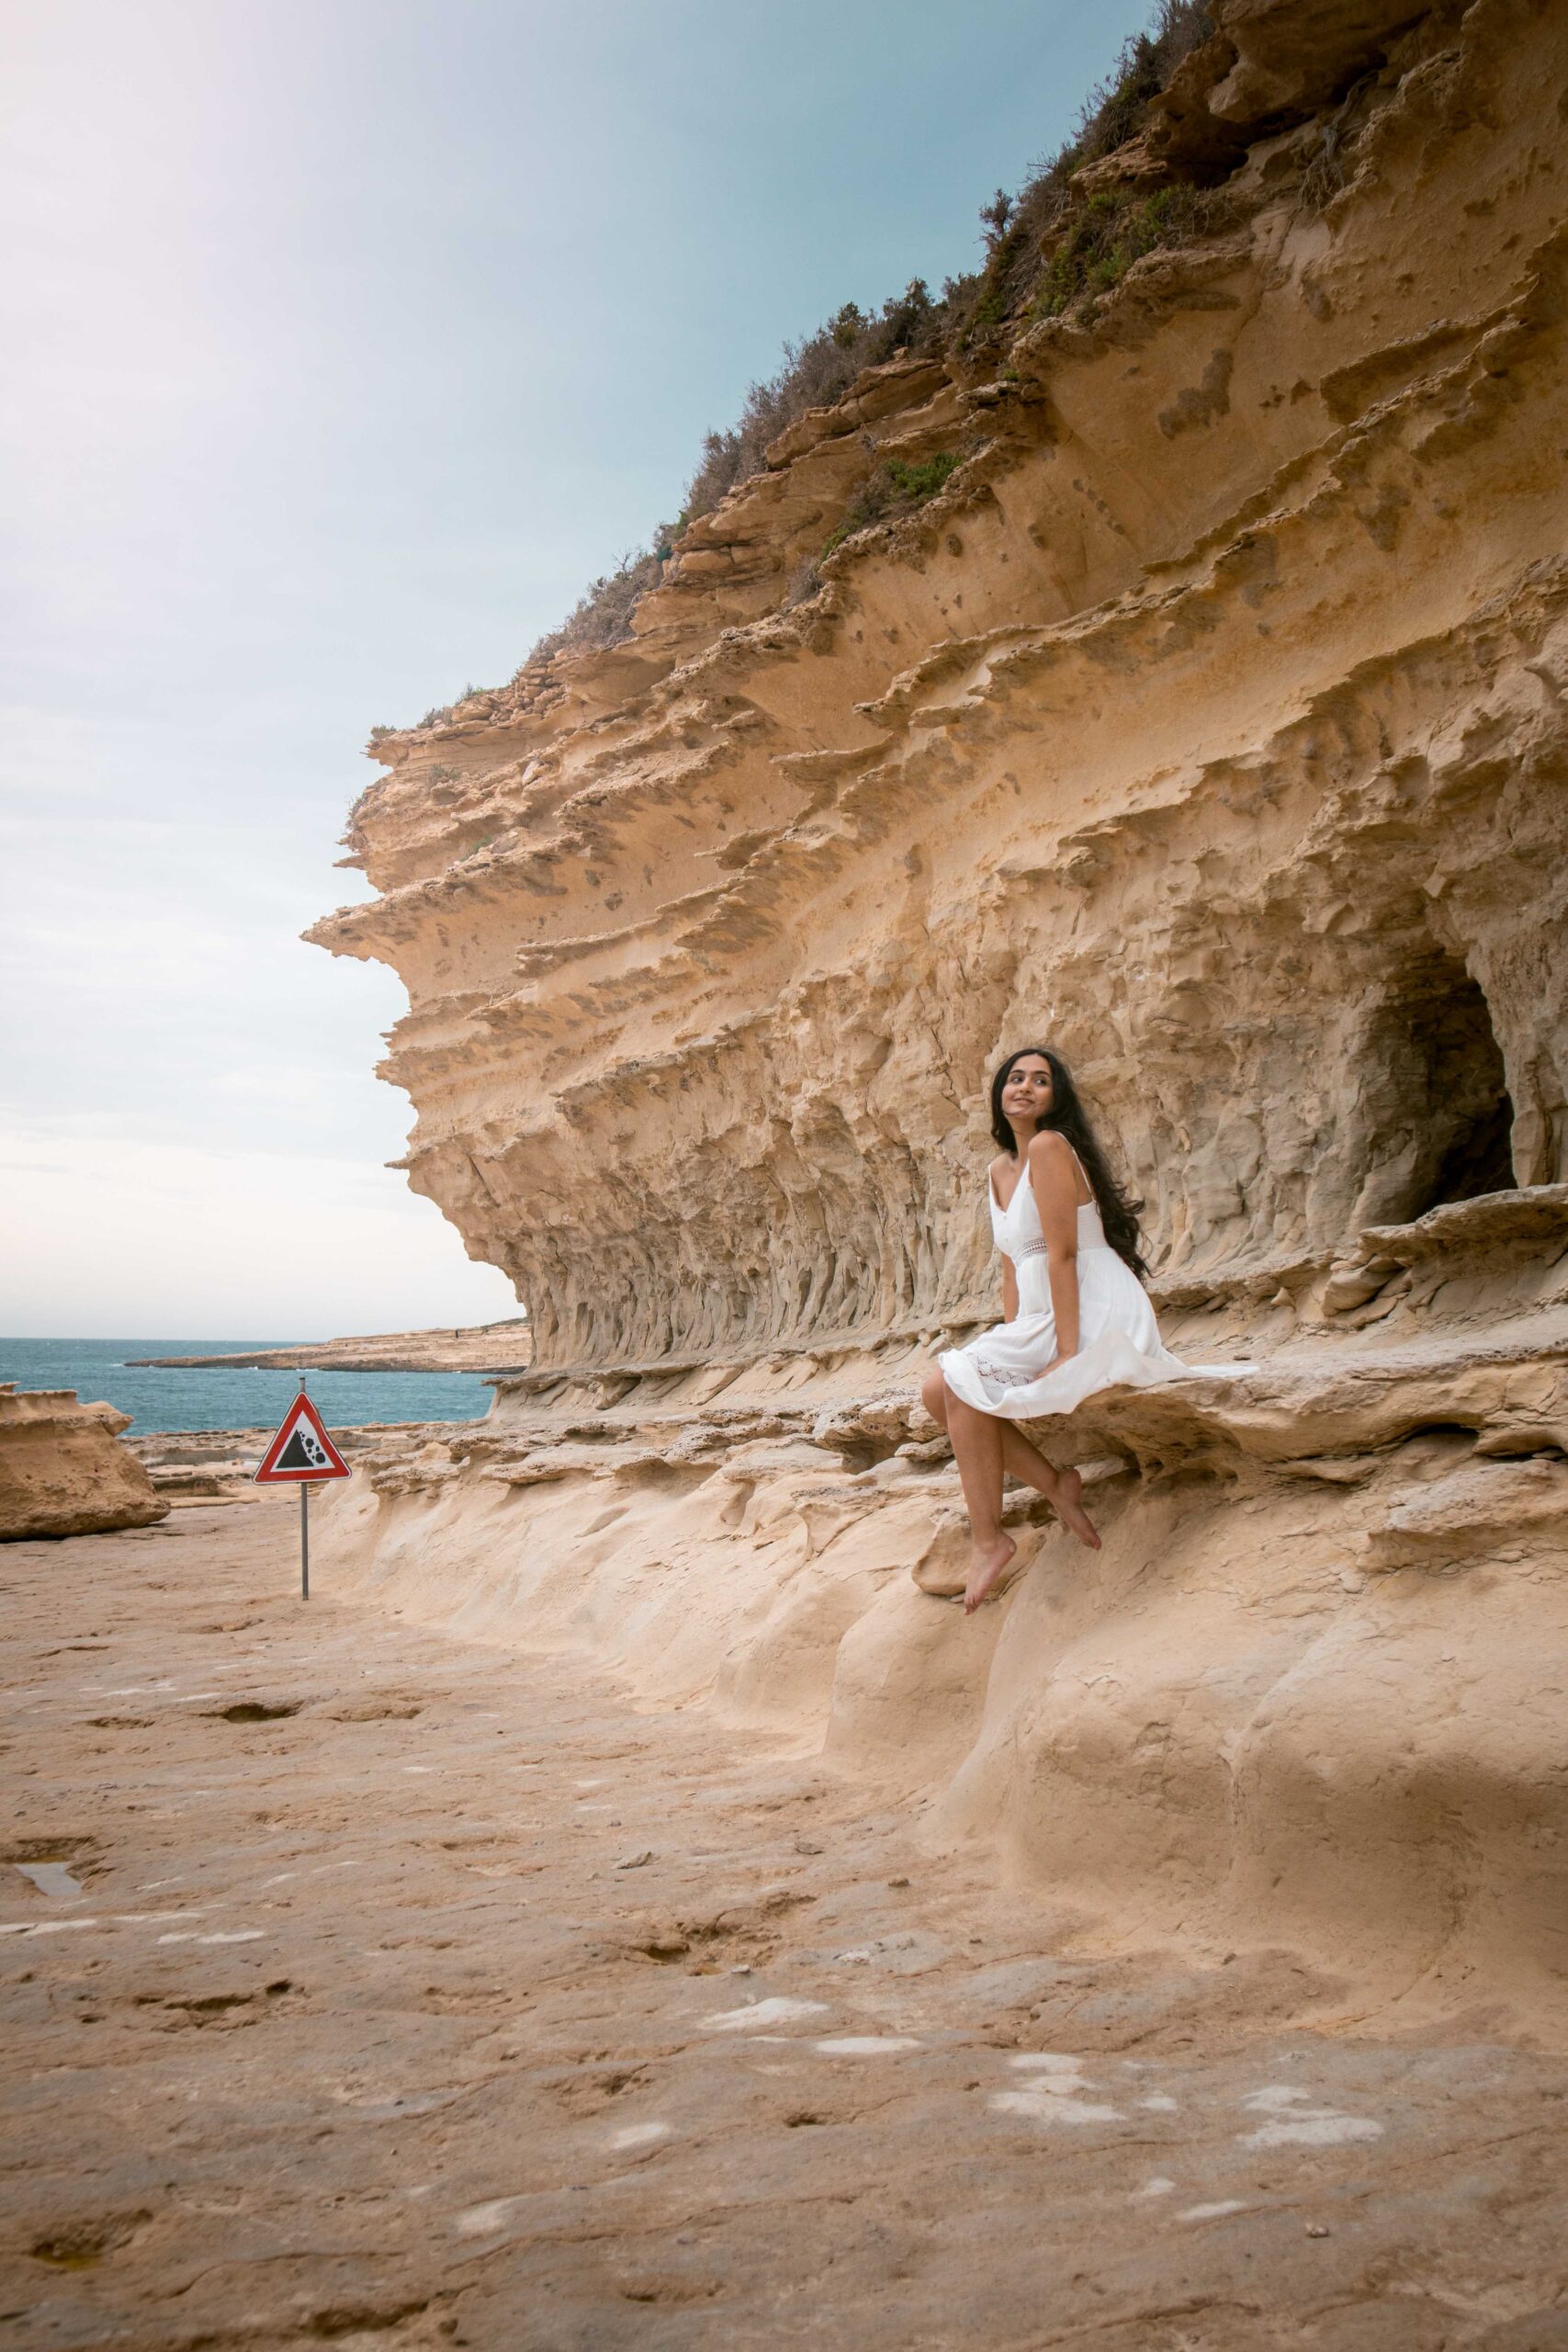 Woman wearing a white dress sitting near the cliffs of the Il-Qali hiking area located near Saint Peter's Pool in Malta